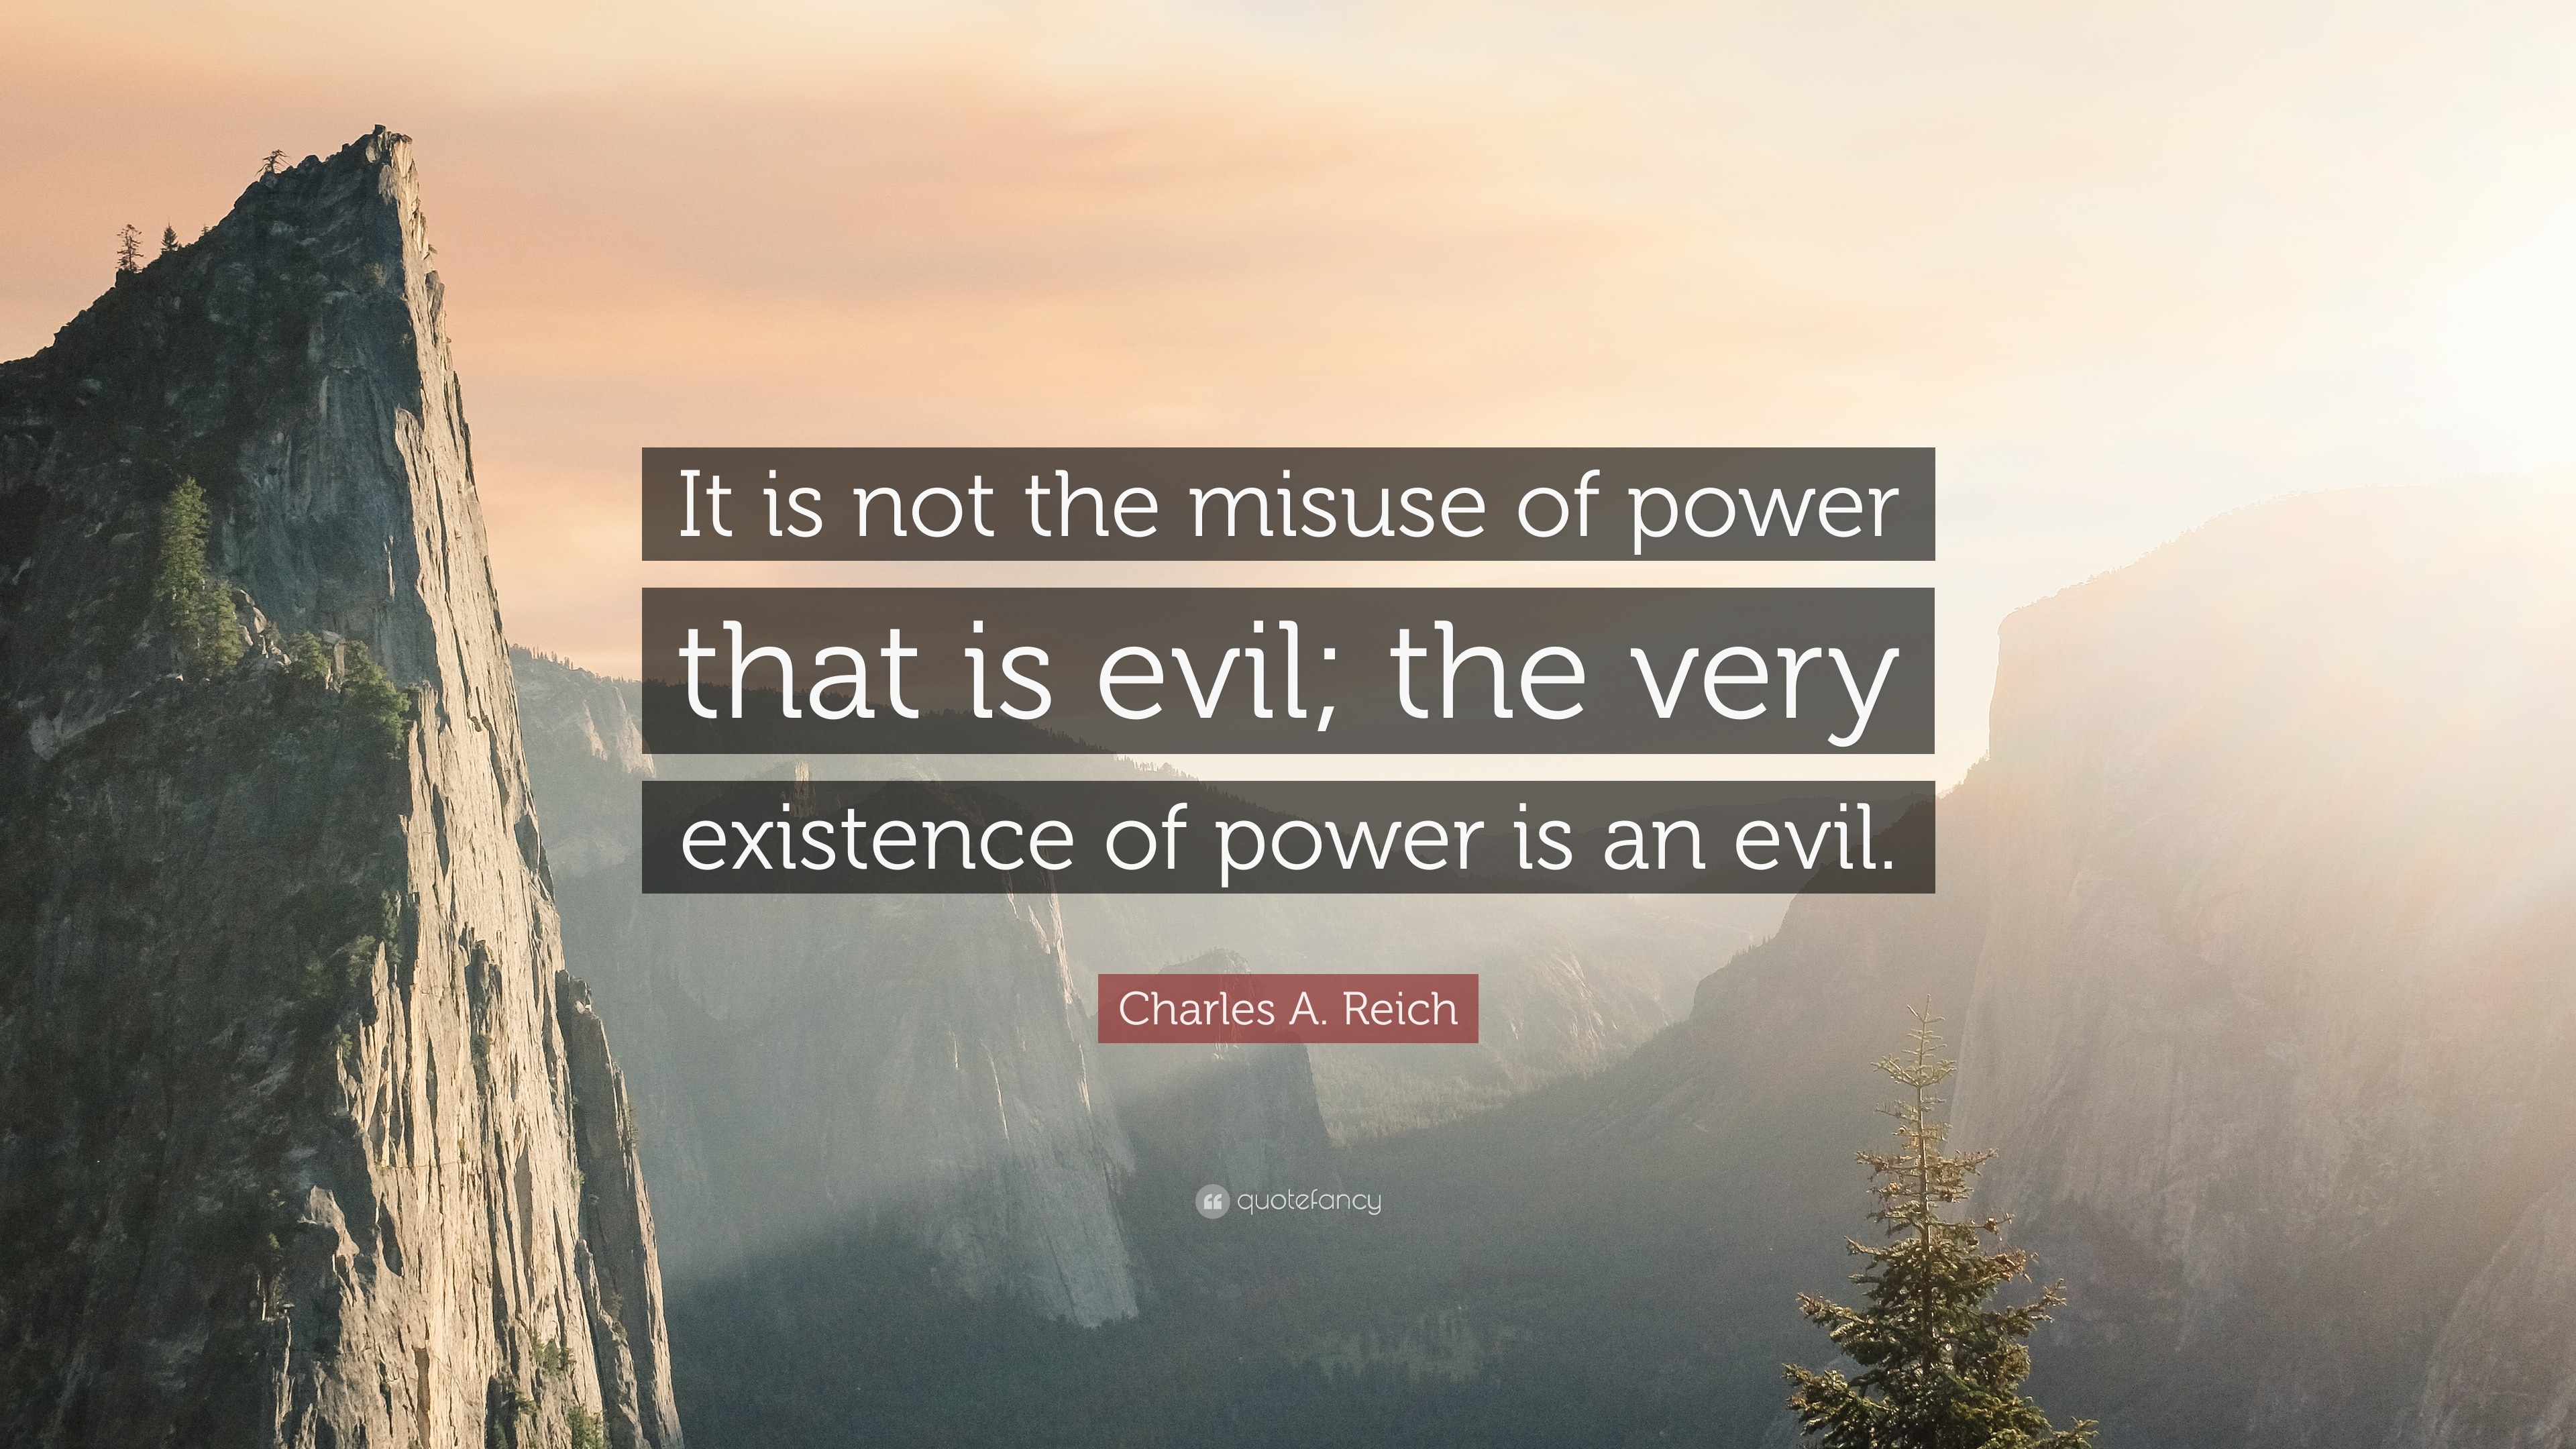 Misuse of power quotes